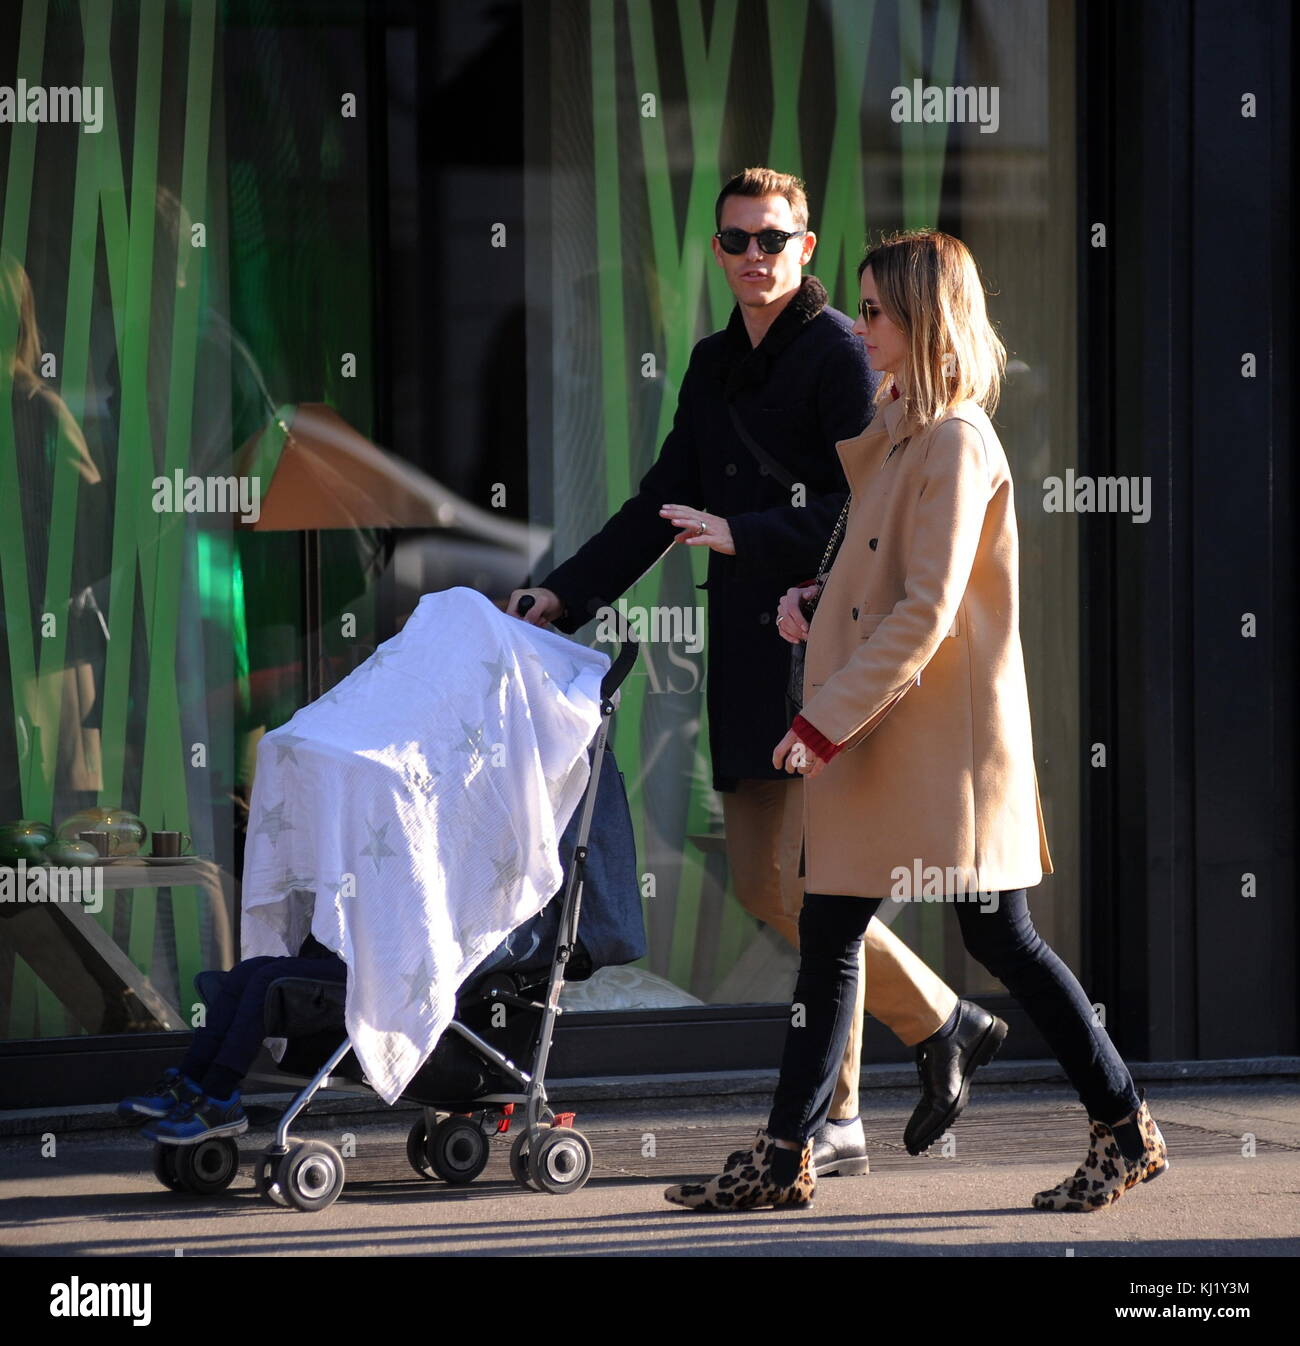 Milan, Stephan Lichtsteiner in the center with his wife and son The  defender of Juventus and Switzerland's national team, Stephan Lichtsteiner,  comes to the center for a few hours of relaxation. Walking on  Montenapooeone Street along with his wife Manuela ...